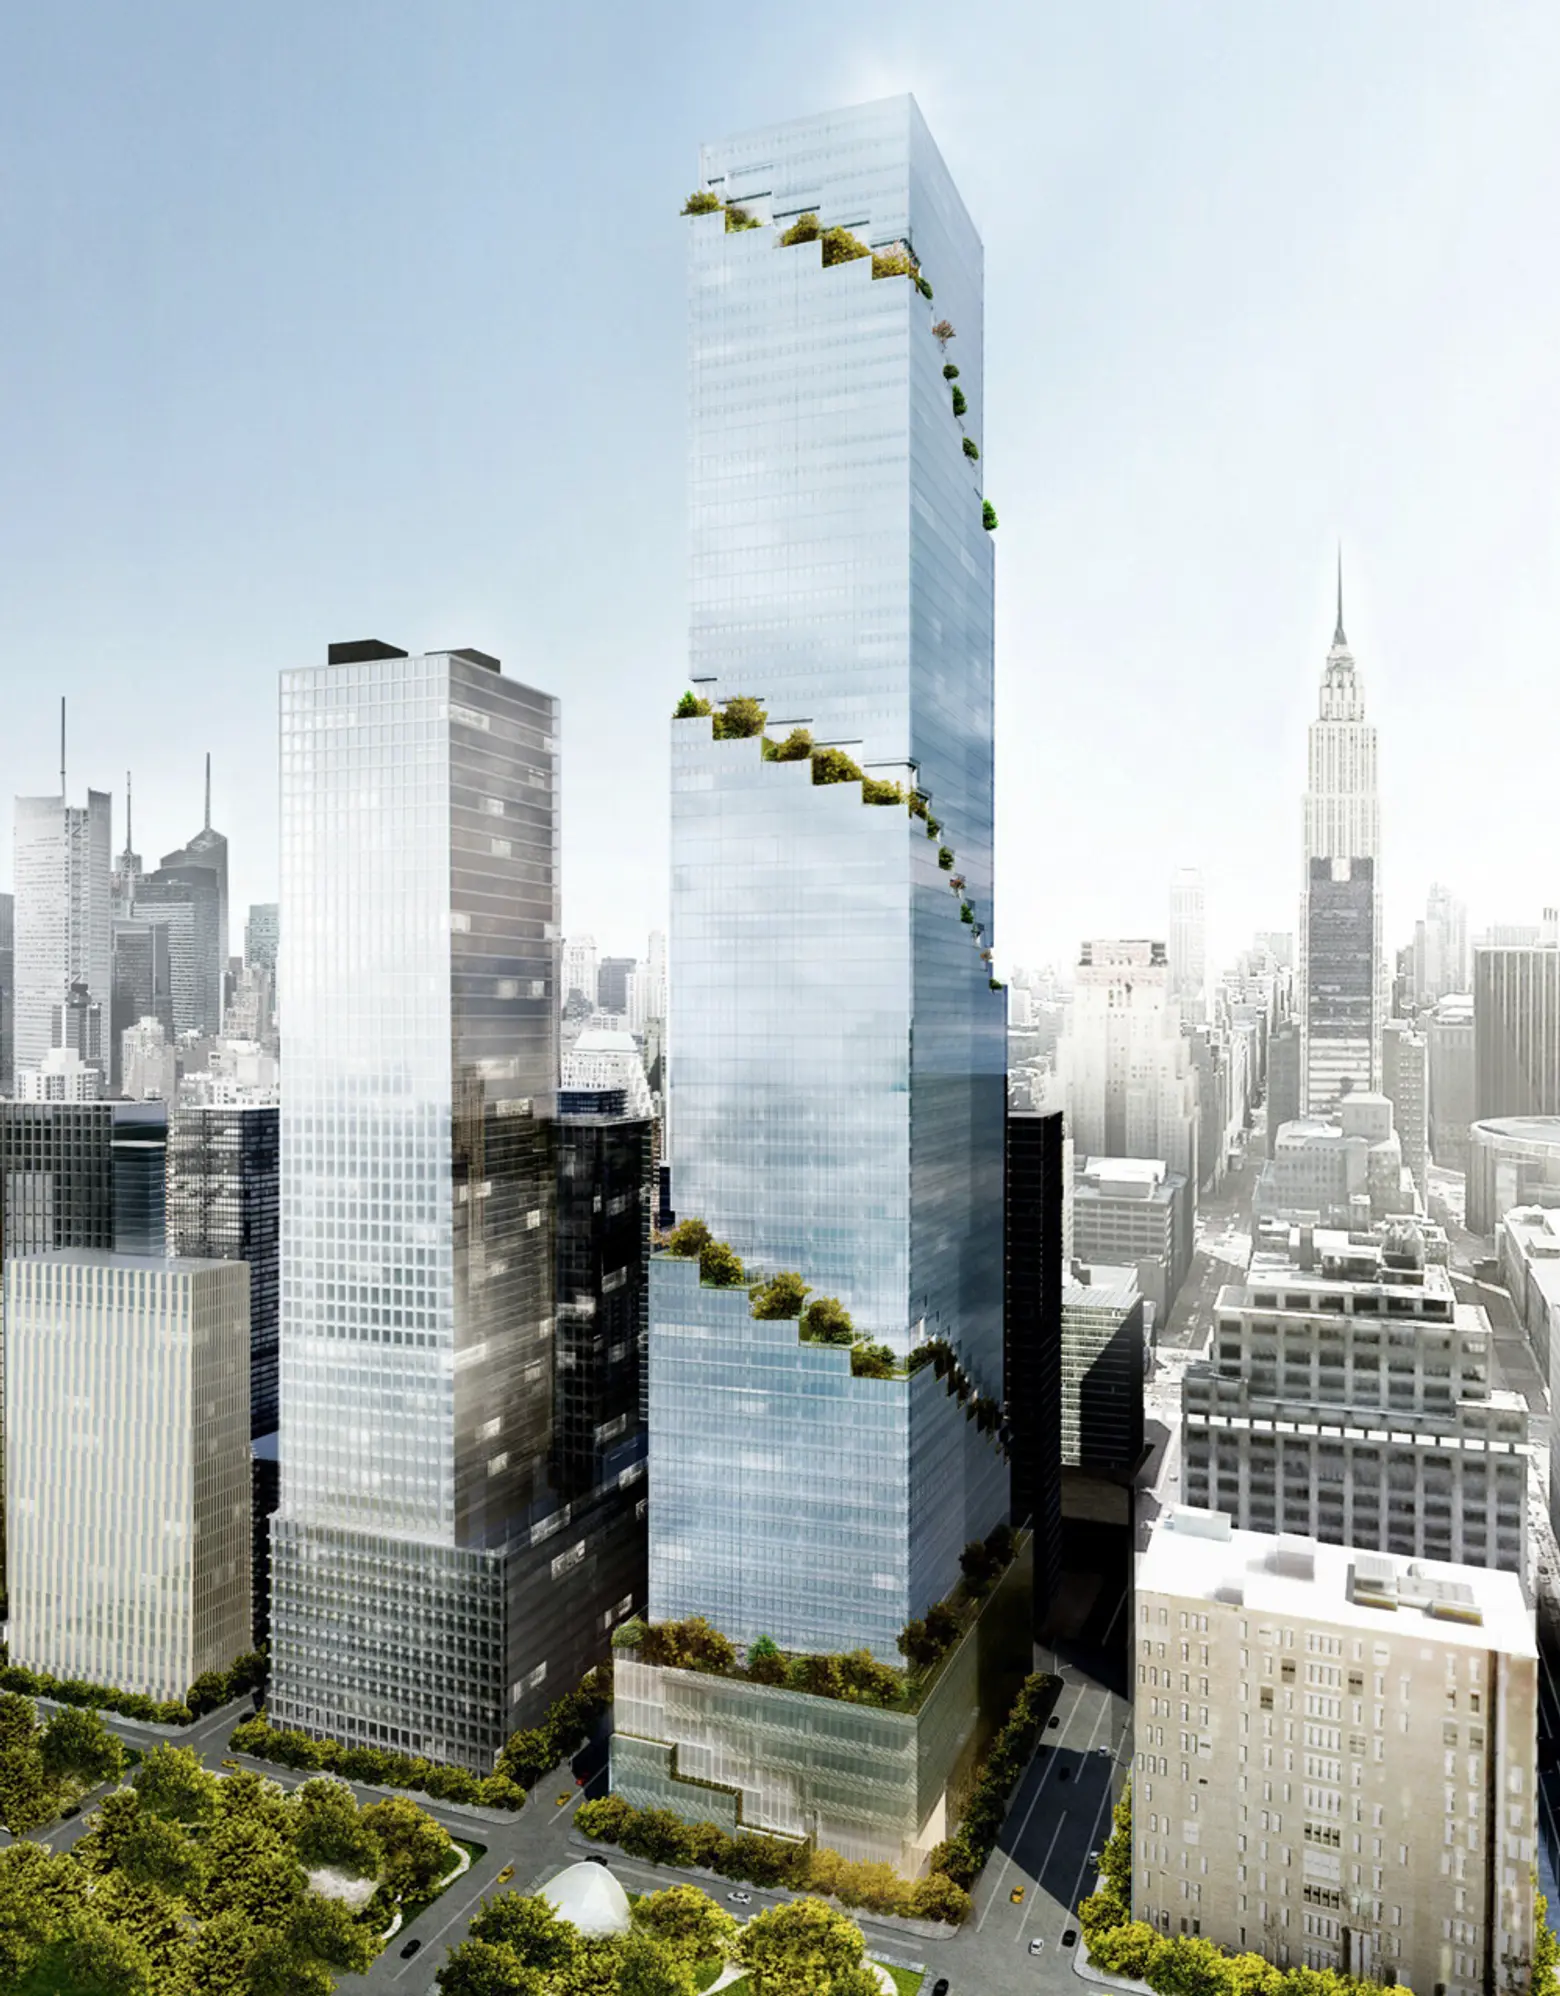 POLL: Are You a Fan of Bjarke Ingels’ Design for the Spiral?